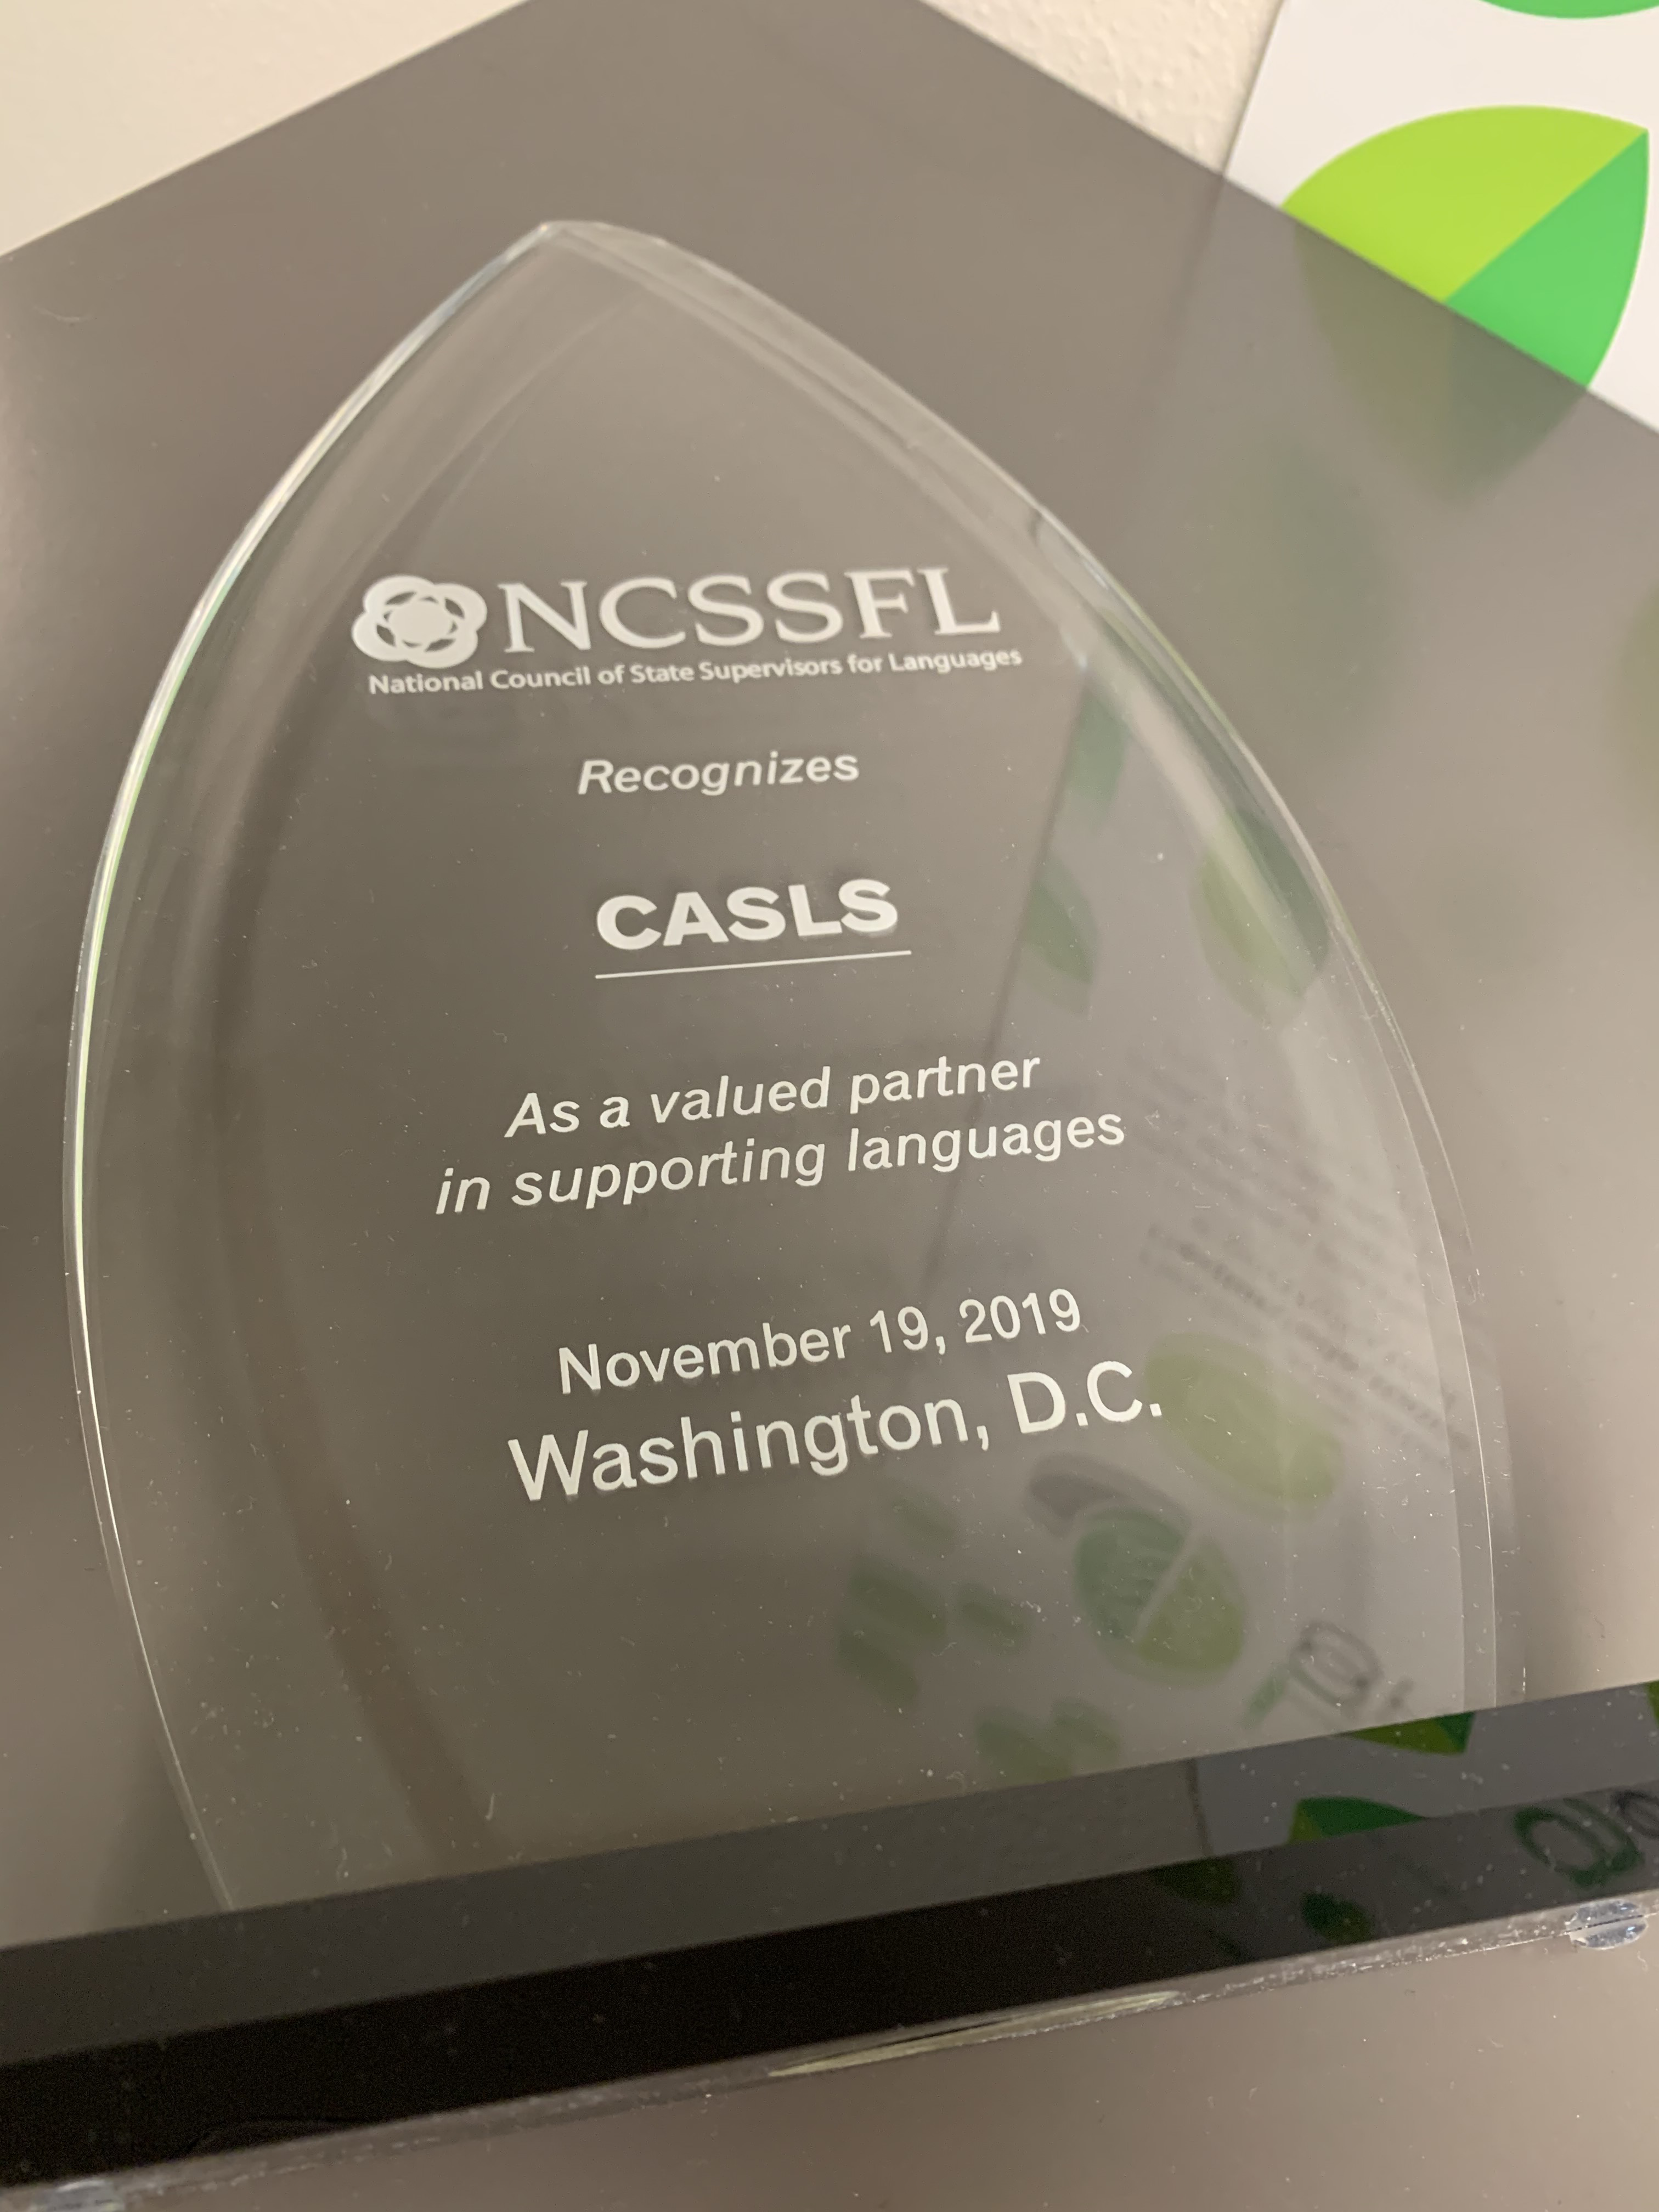 image of the plaque from NCSSFL